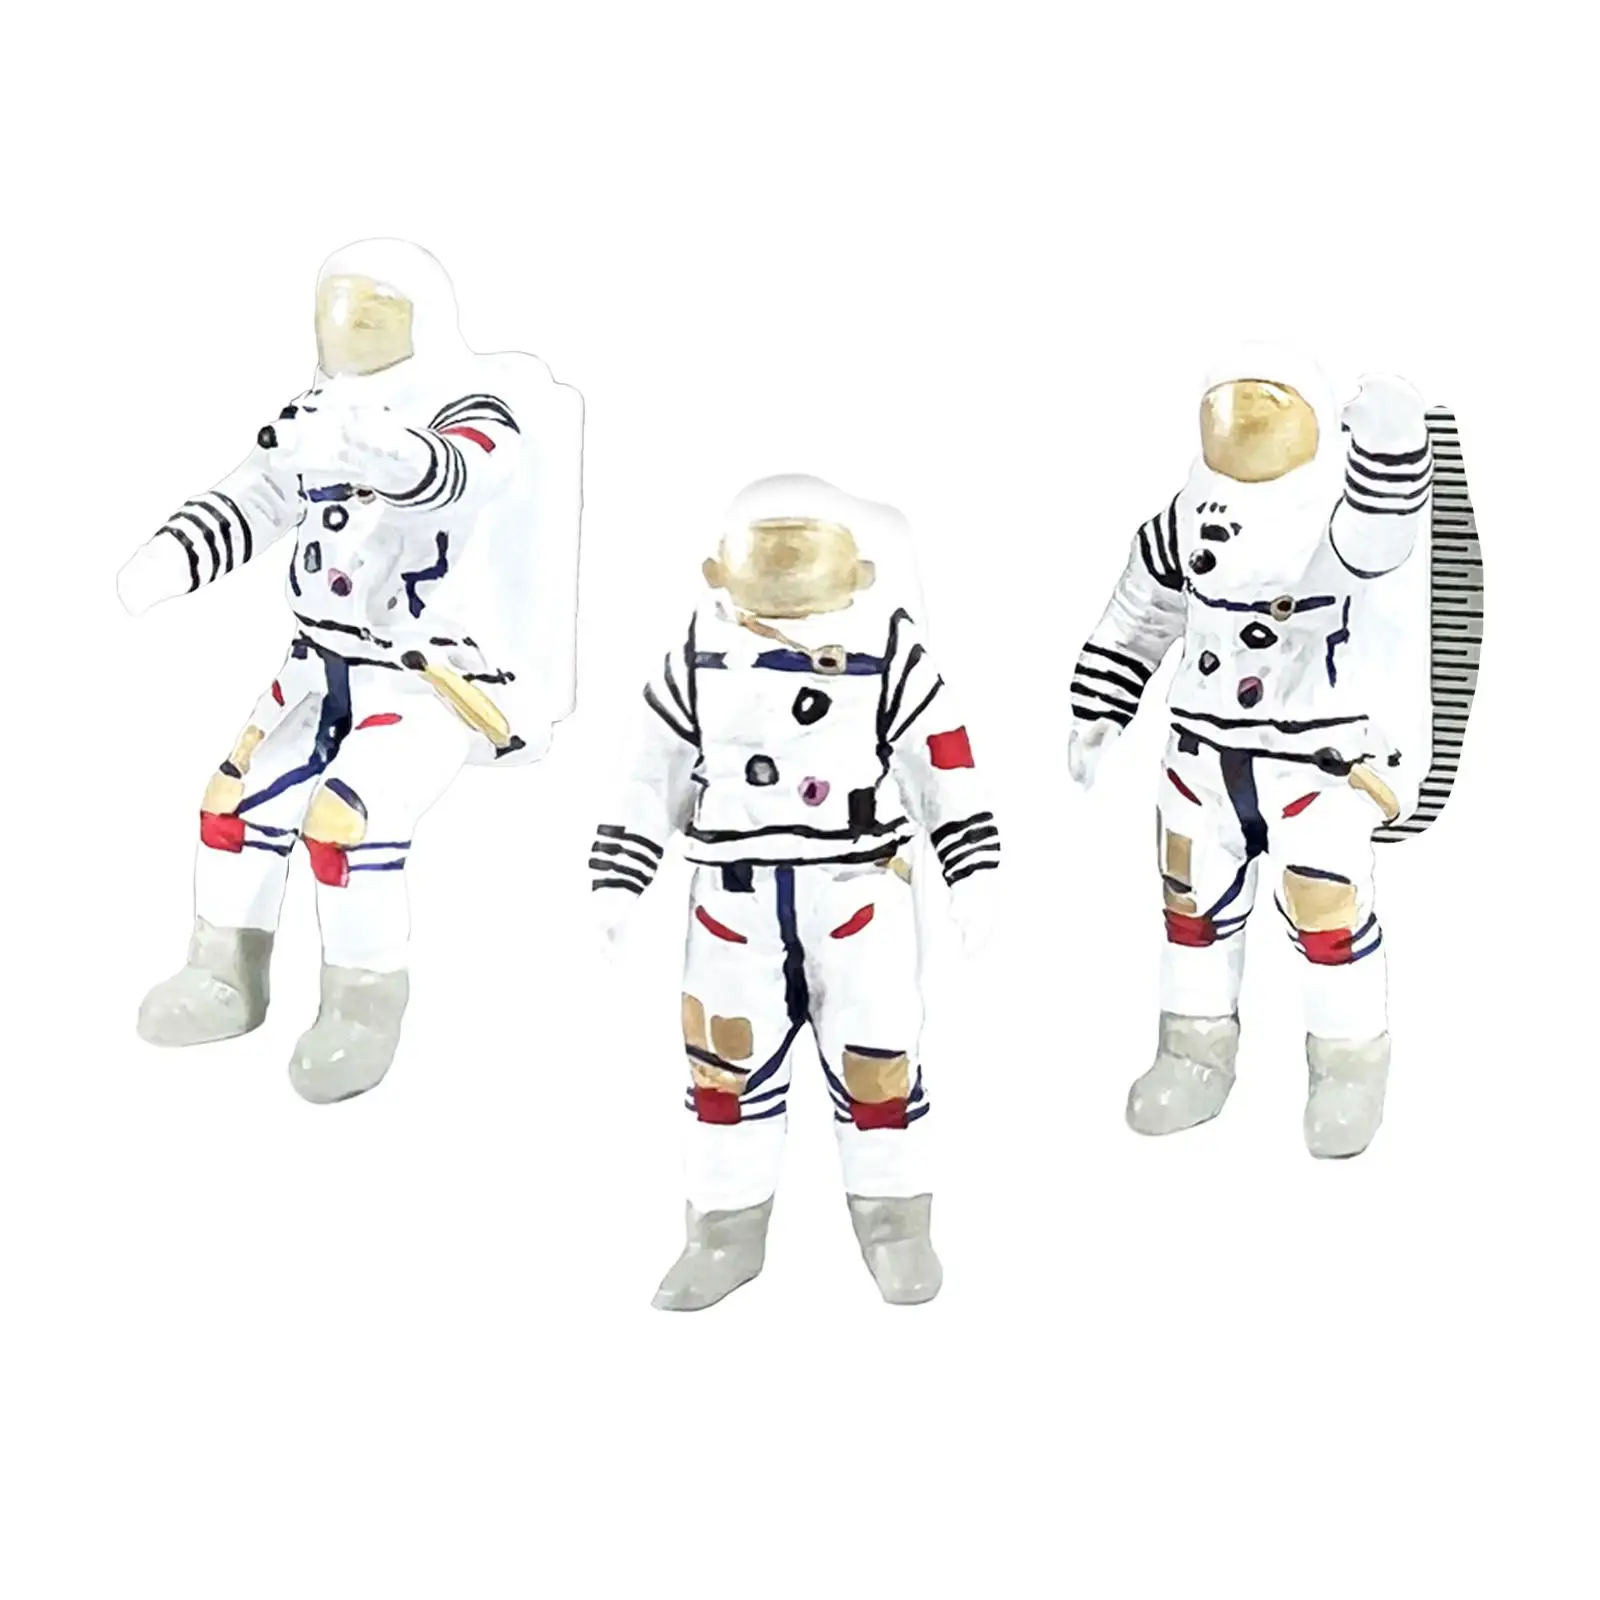 3x 1/64 Scale Astronaut Figurines for Party Favor Dollhouse Micro Landscapes